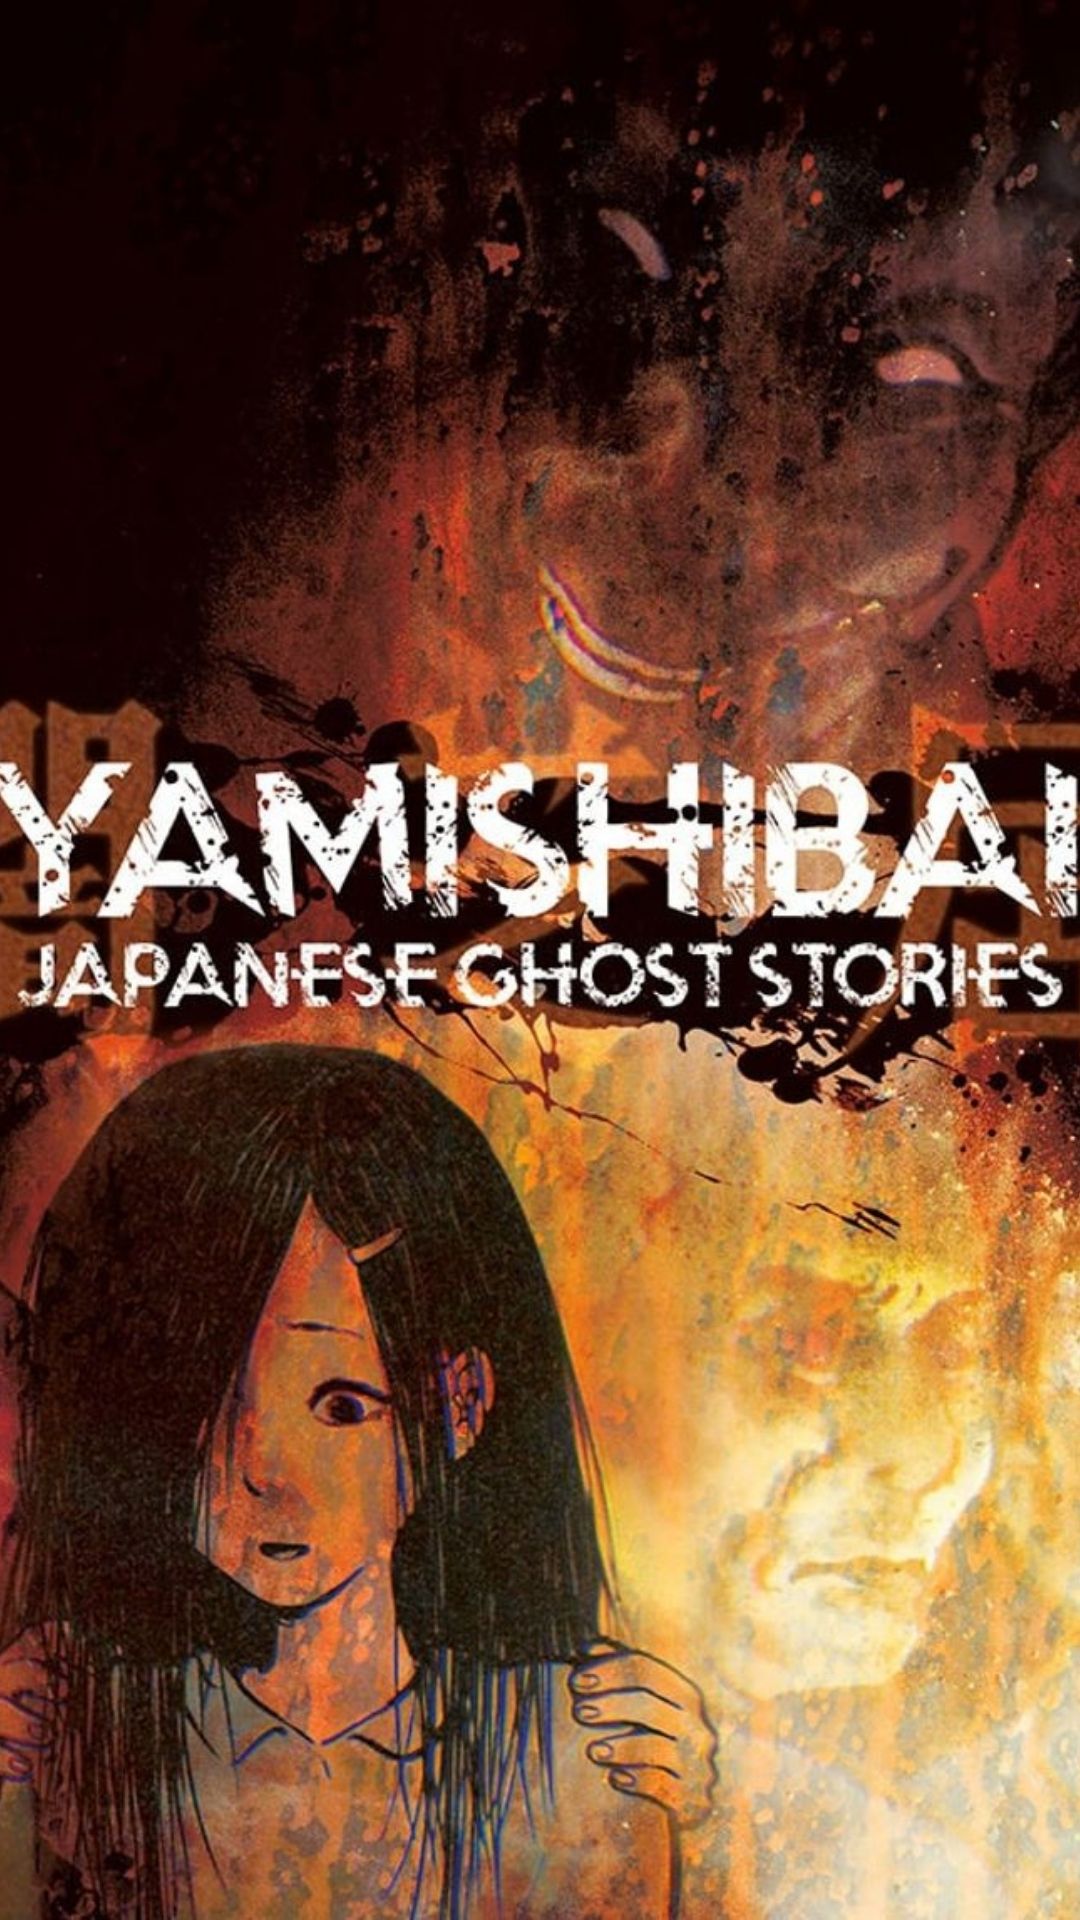 Get Ready for a Test of Courage this July with Yamishibai’s Ninth Season!